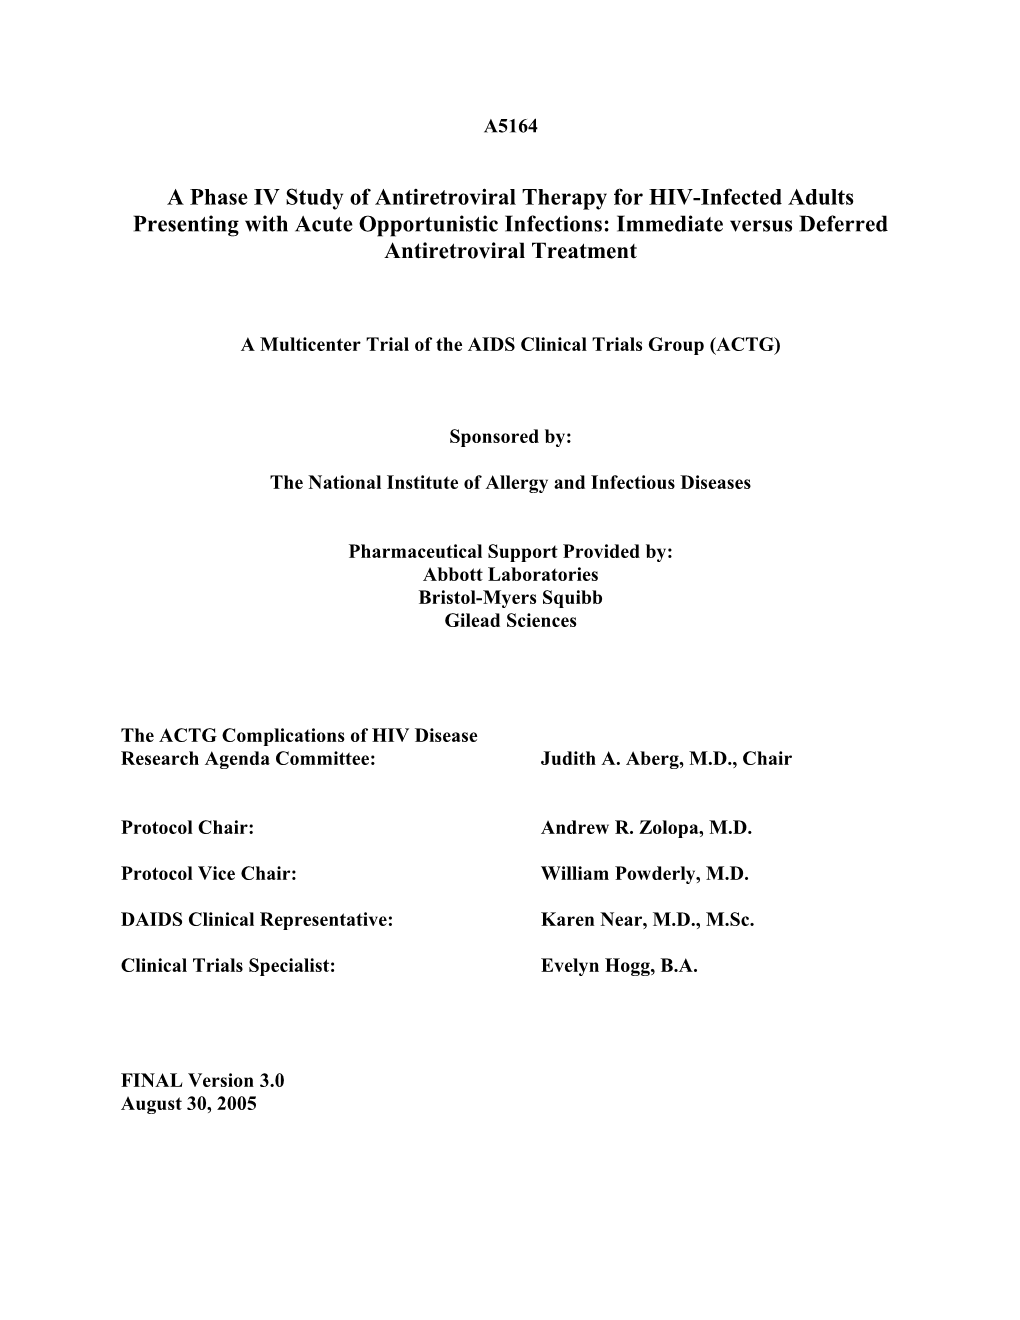 A Multicenter Trial of the AIDS Clinical Trials Group (ACTG)